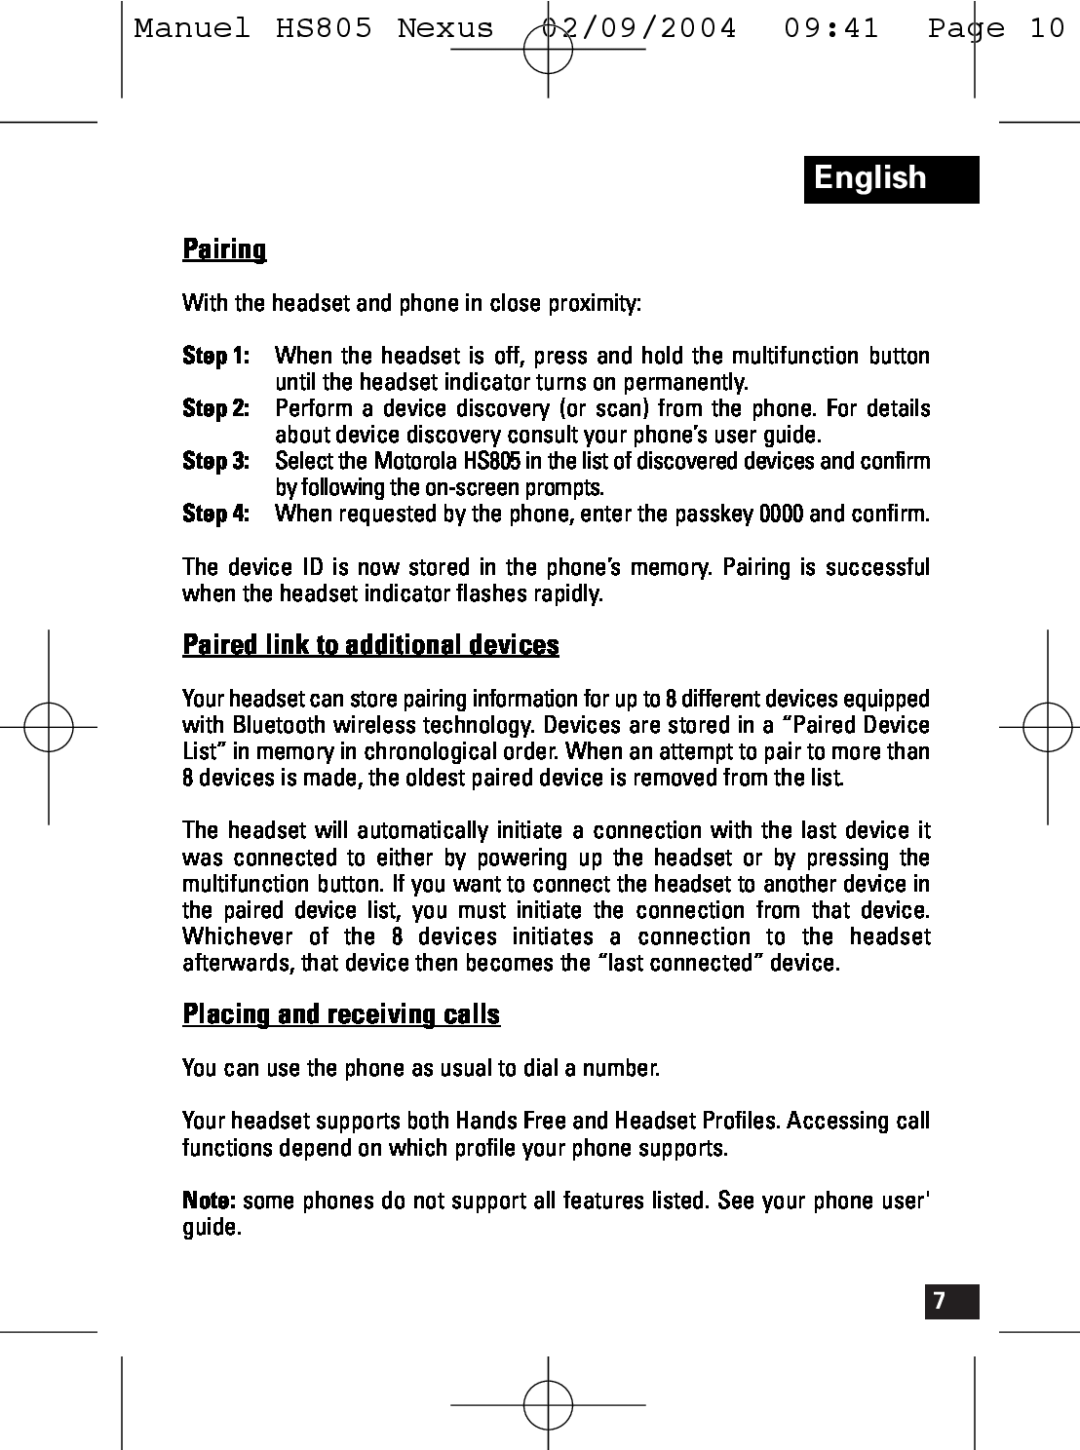 Motorola HS805 manual Pairing, Paired link to additional devices, Placing and receiving calls, English 